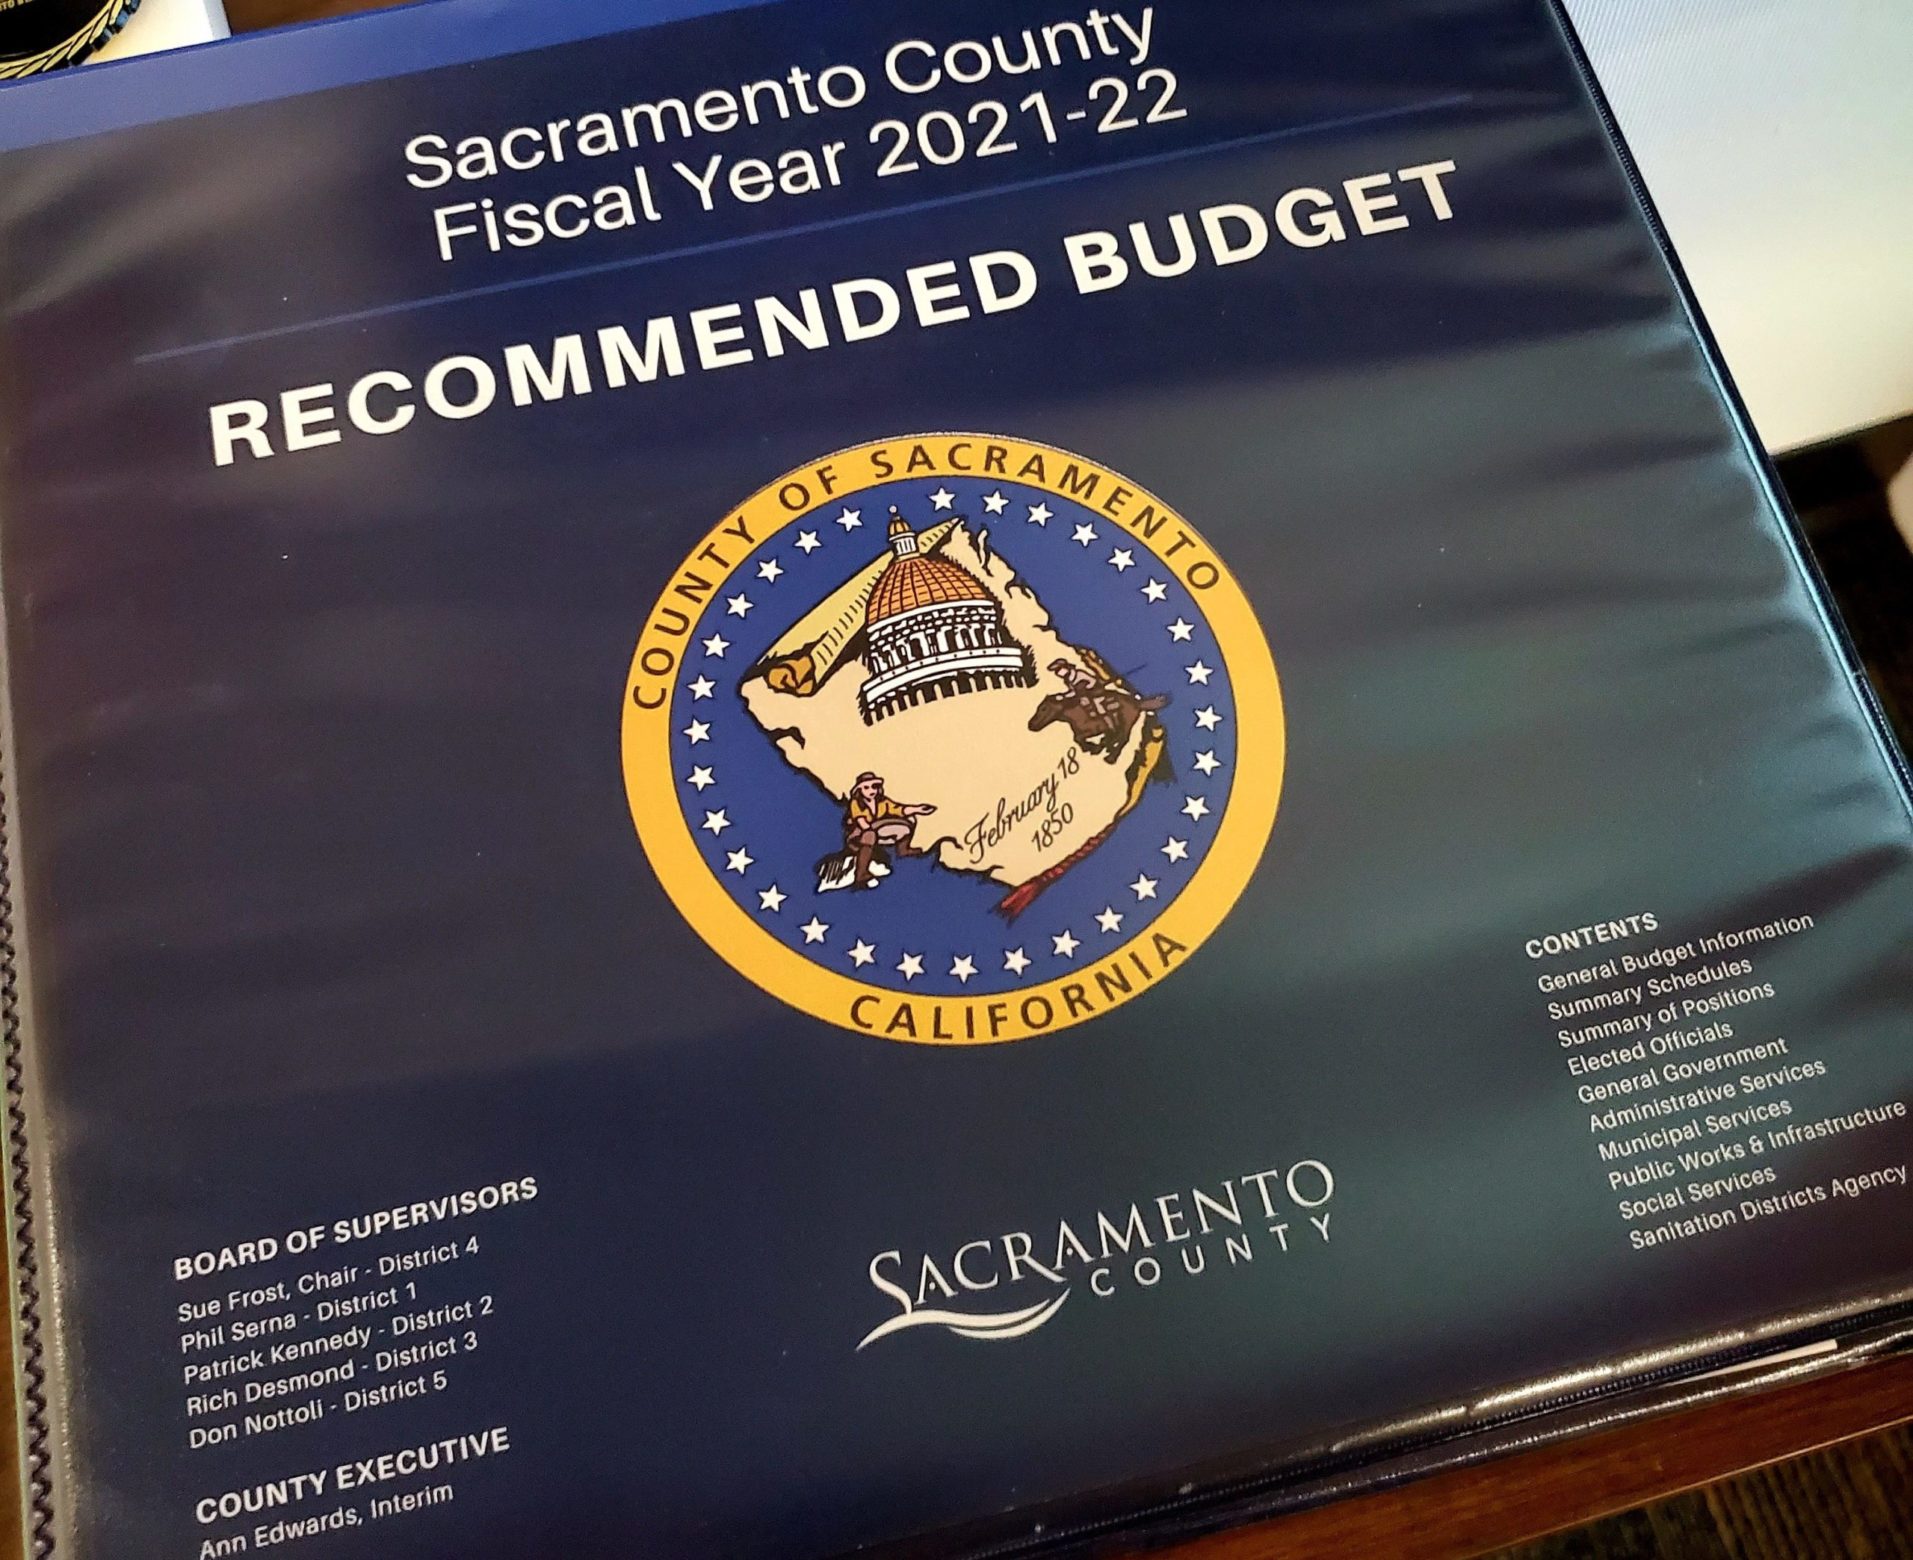 2021-22 Recommended Budget Binder